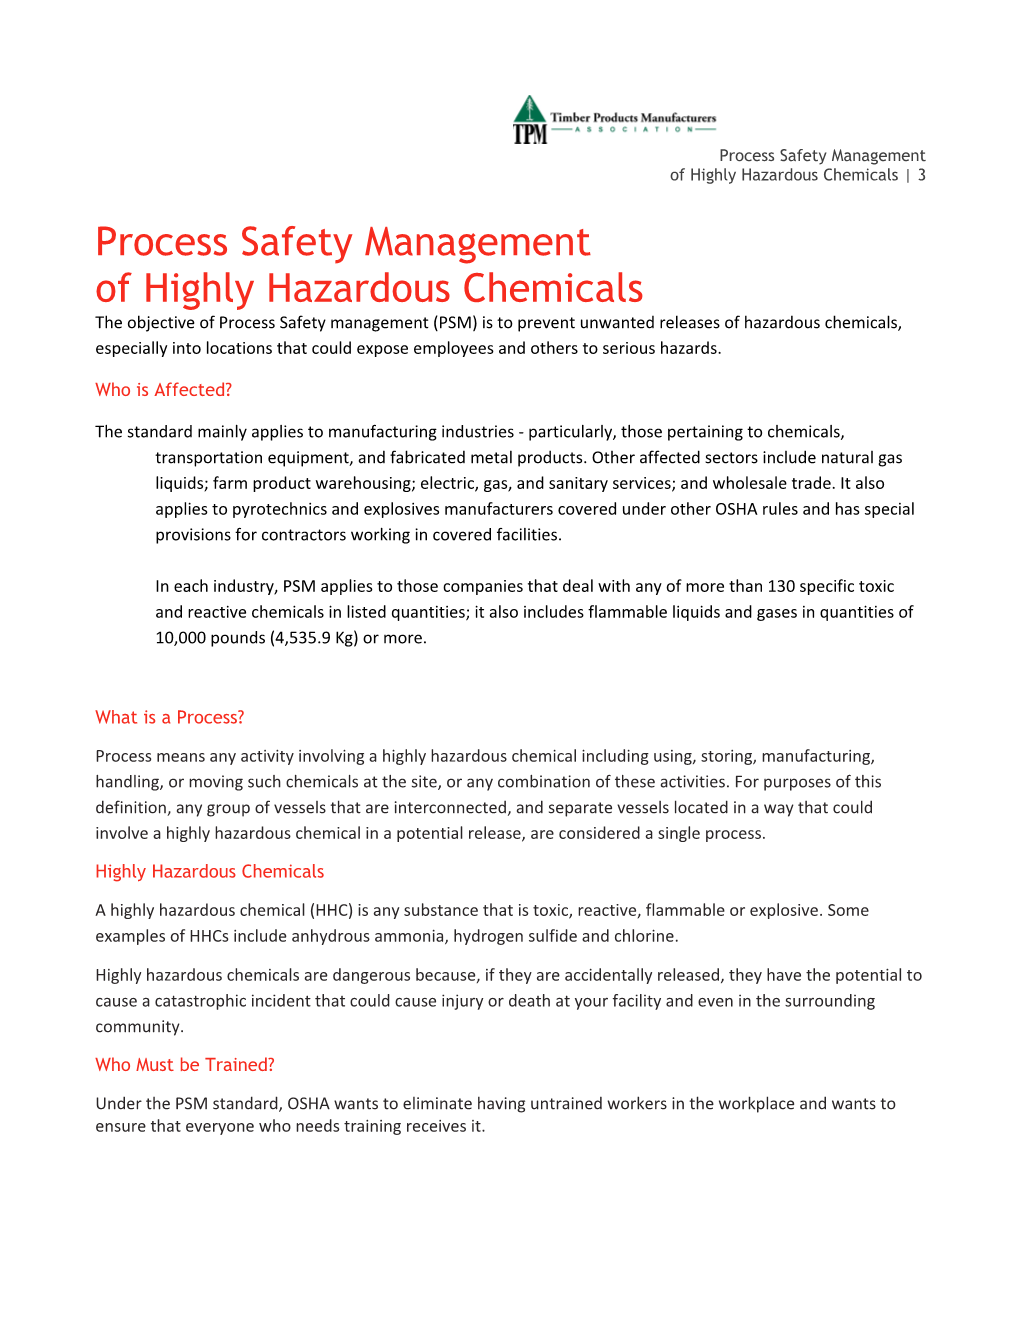 Process Safety Management of Highly Hazardous Chemicals